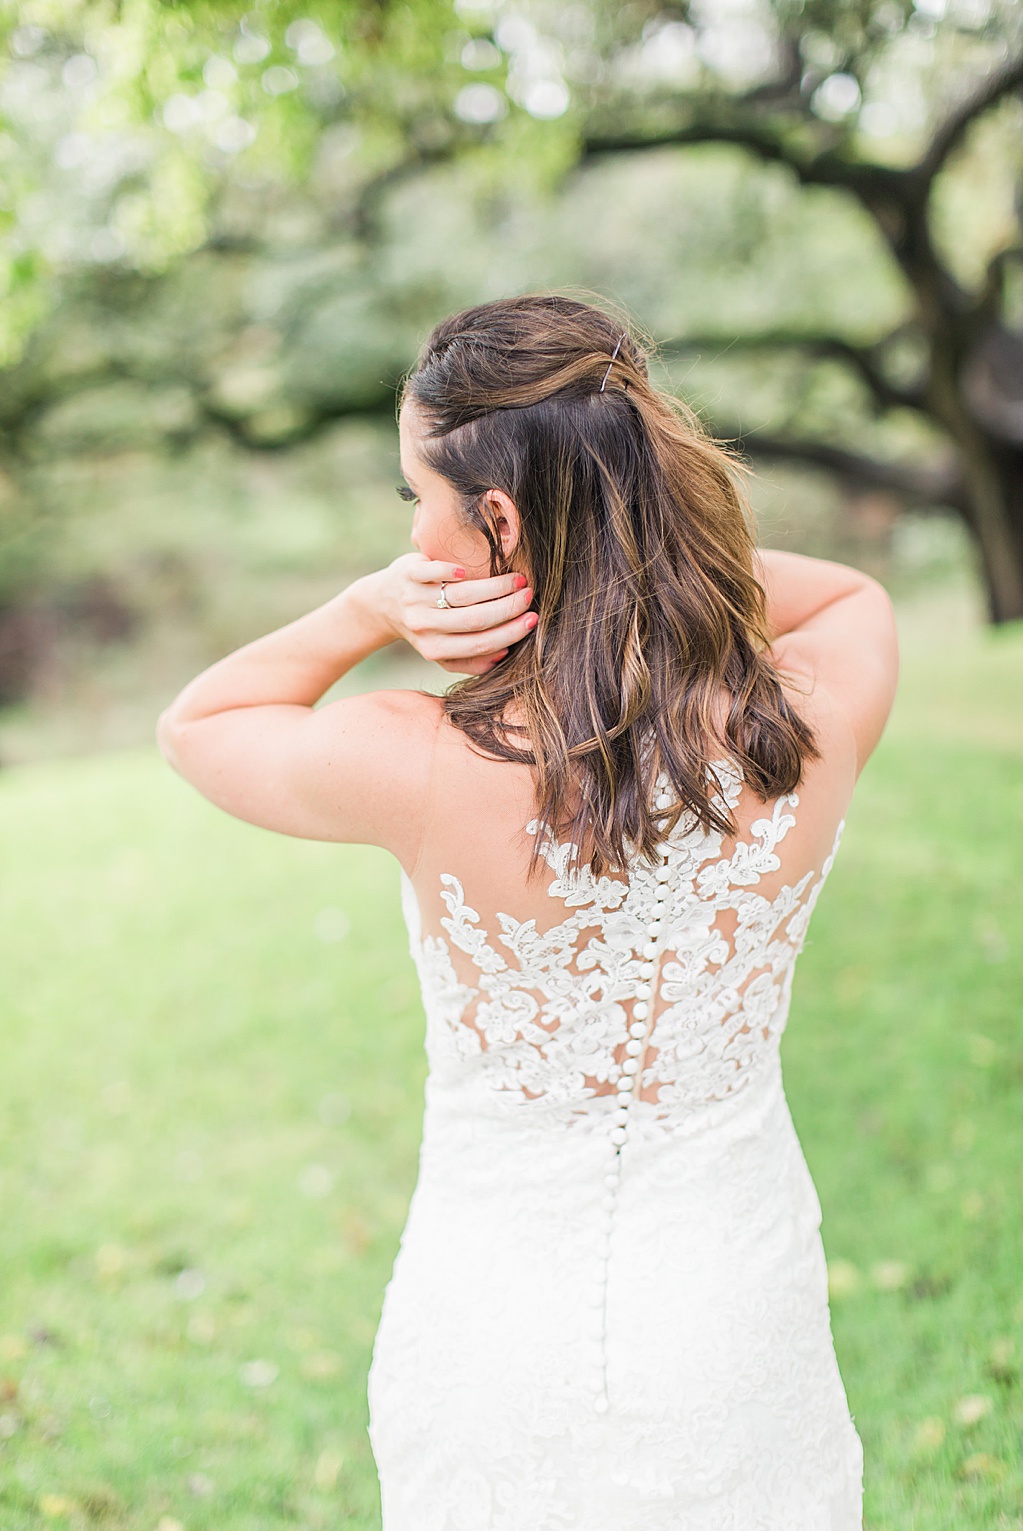 Rainy day bridal session at sisterdale dancehall in boerne texas 0010